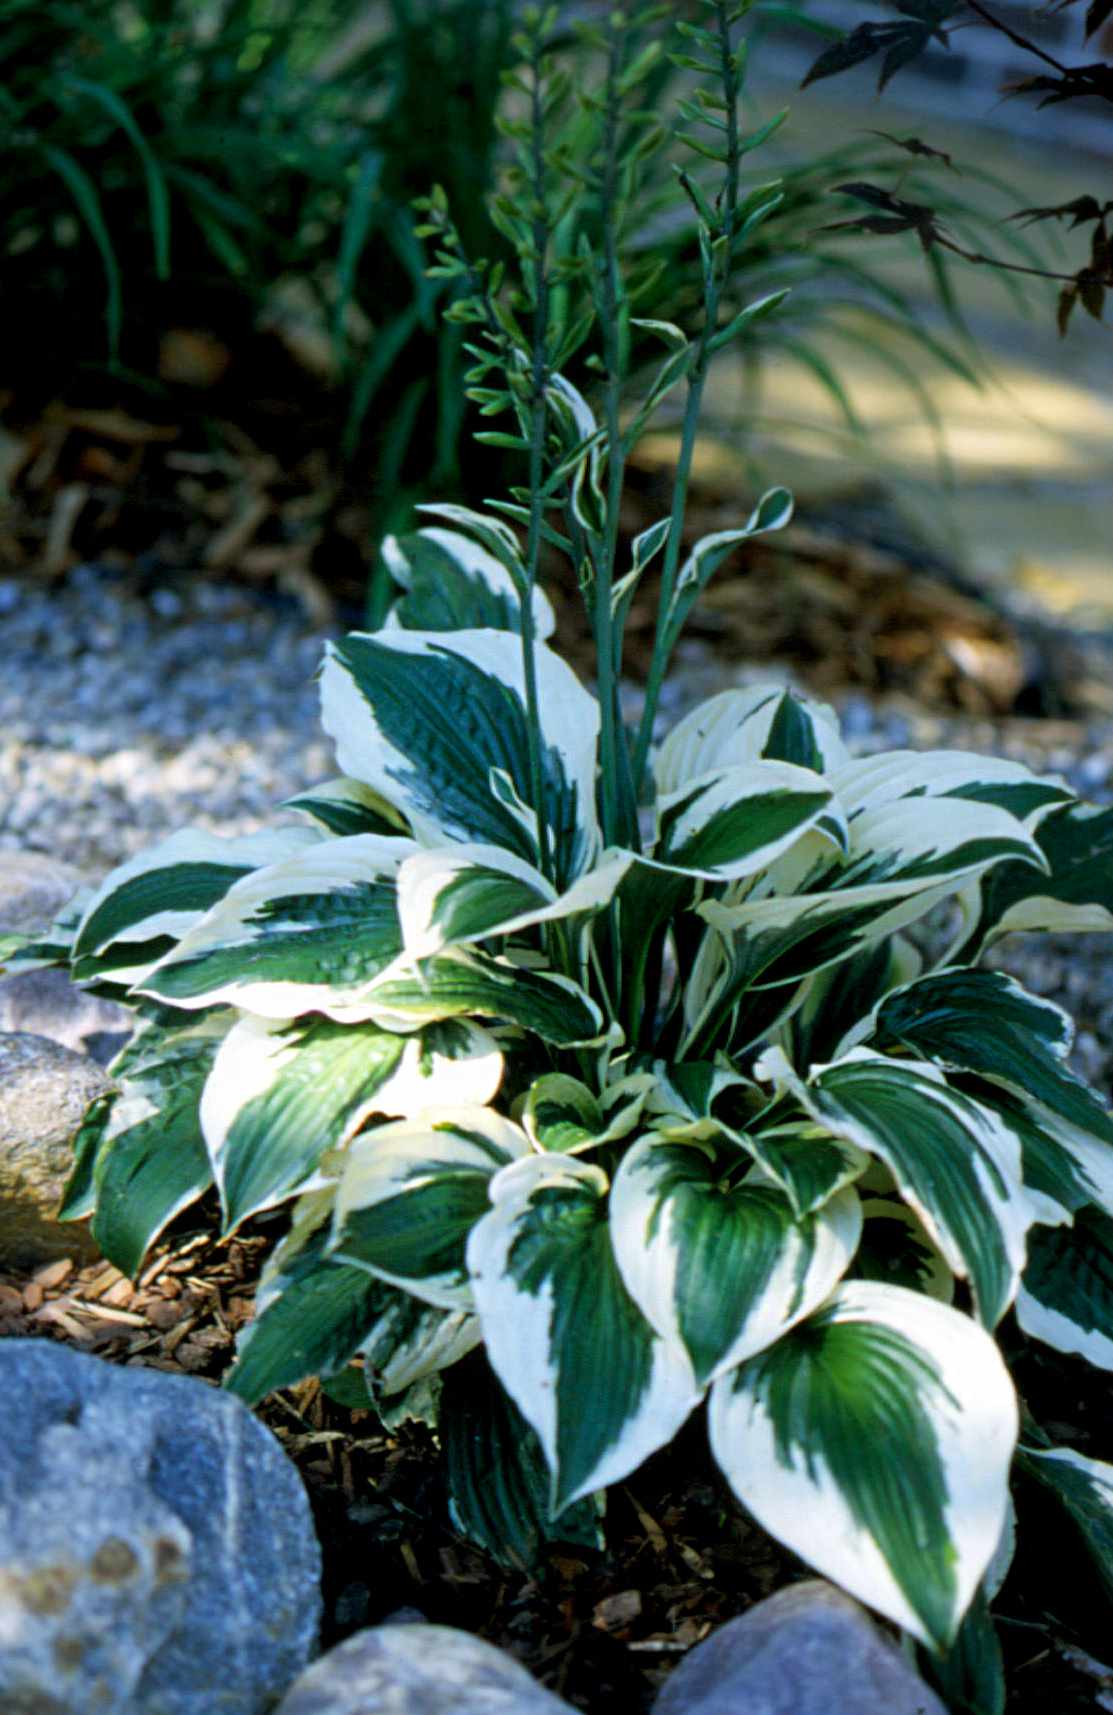 Patriot Hosta with dark green leaves and white edges